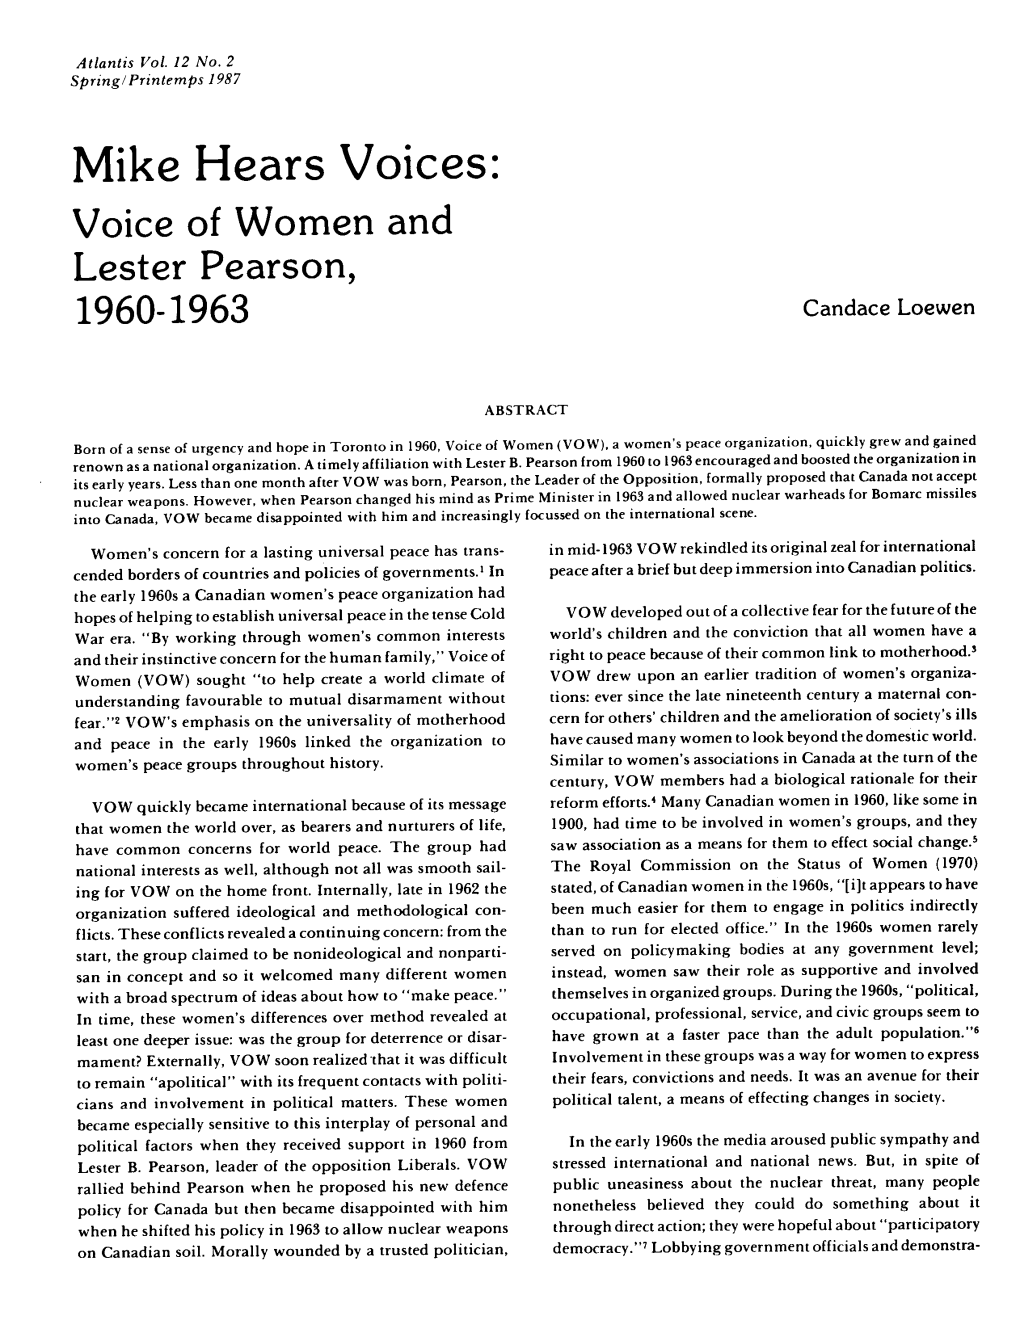 Mike Hears Voices: Voice of Women and Lester Pearson, 1960-1963 Candace Loewen